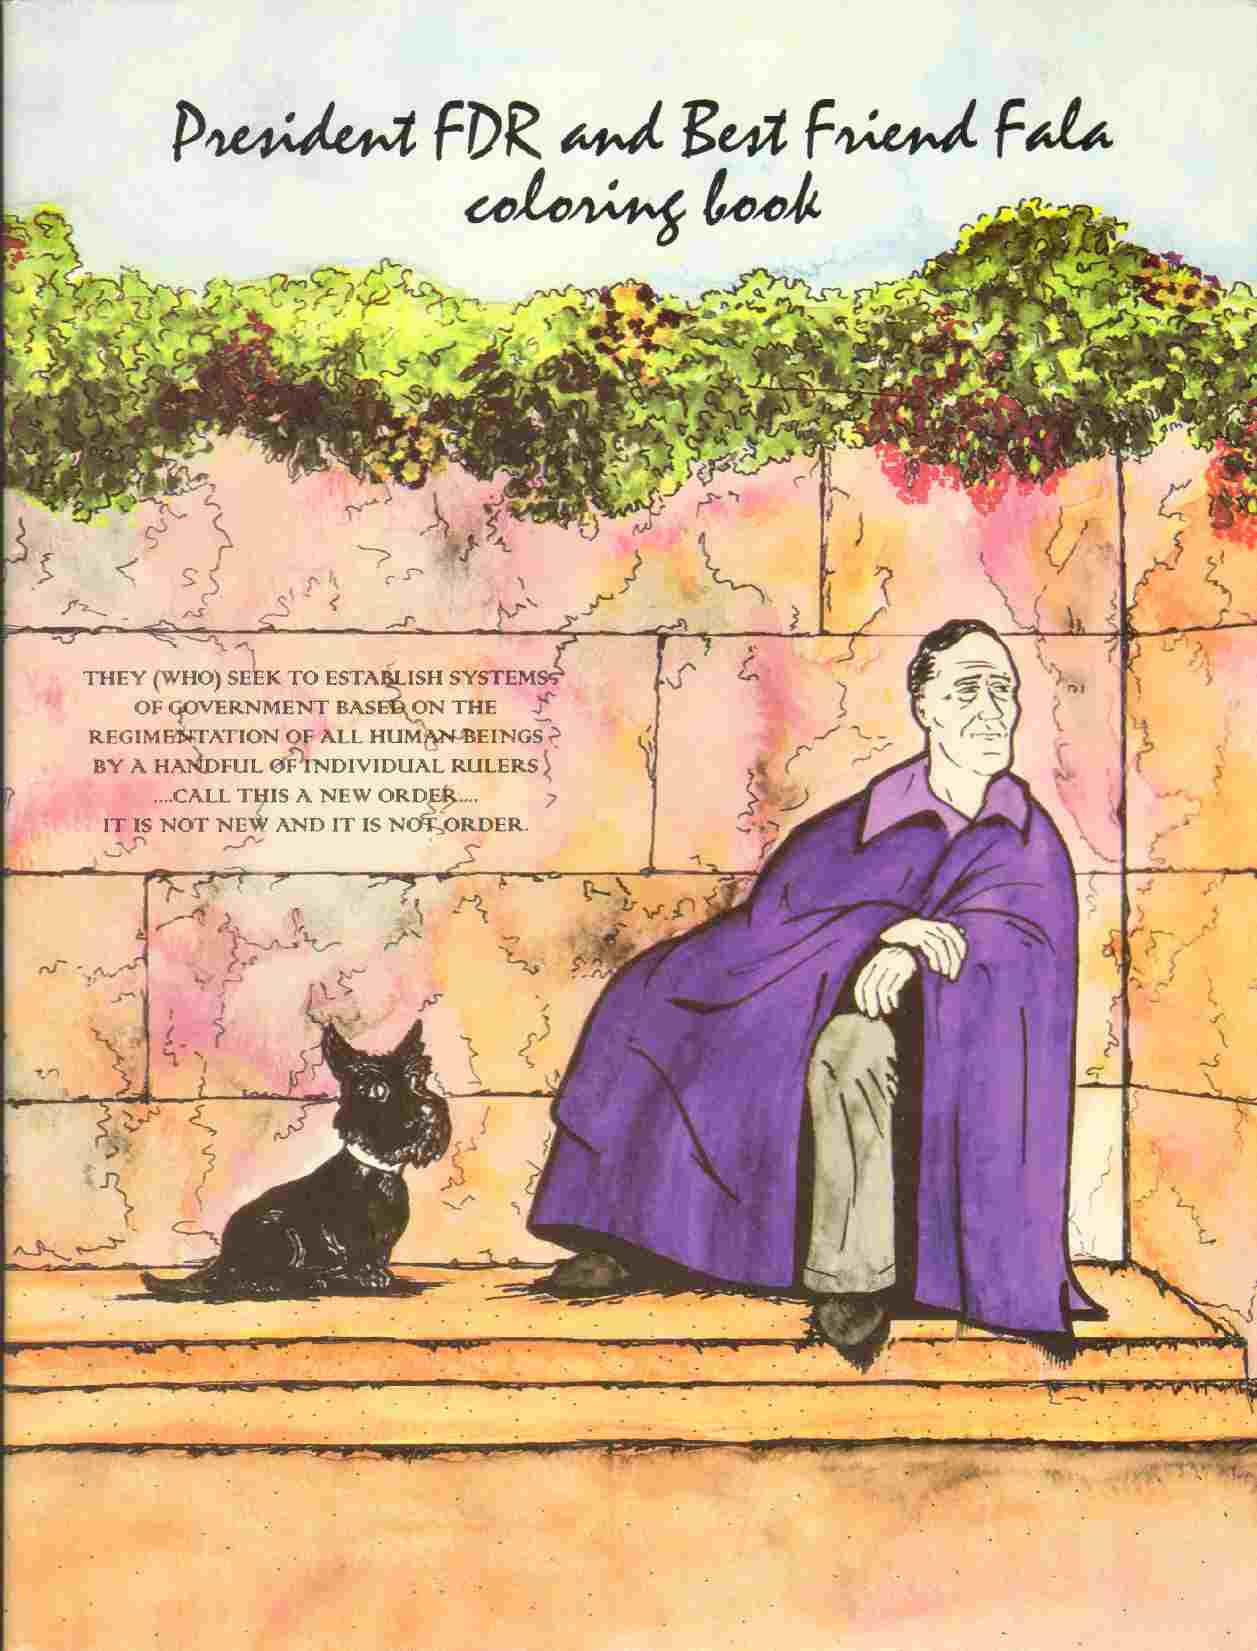 Darling, Diana - PRESIDENT FDR AND BEST FRIEND FALA COLORING BOOK